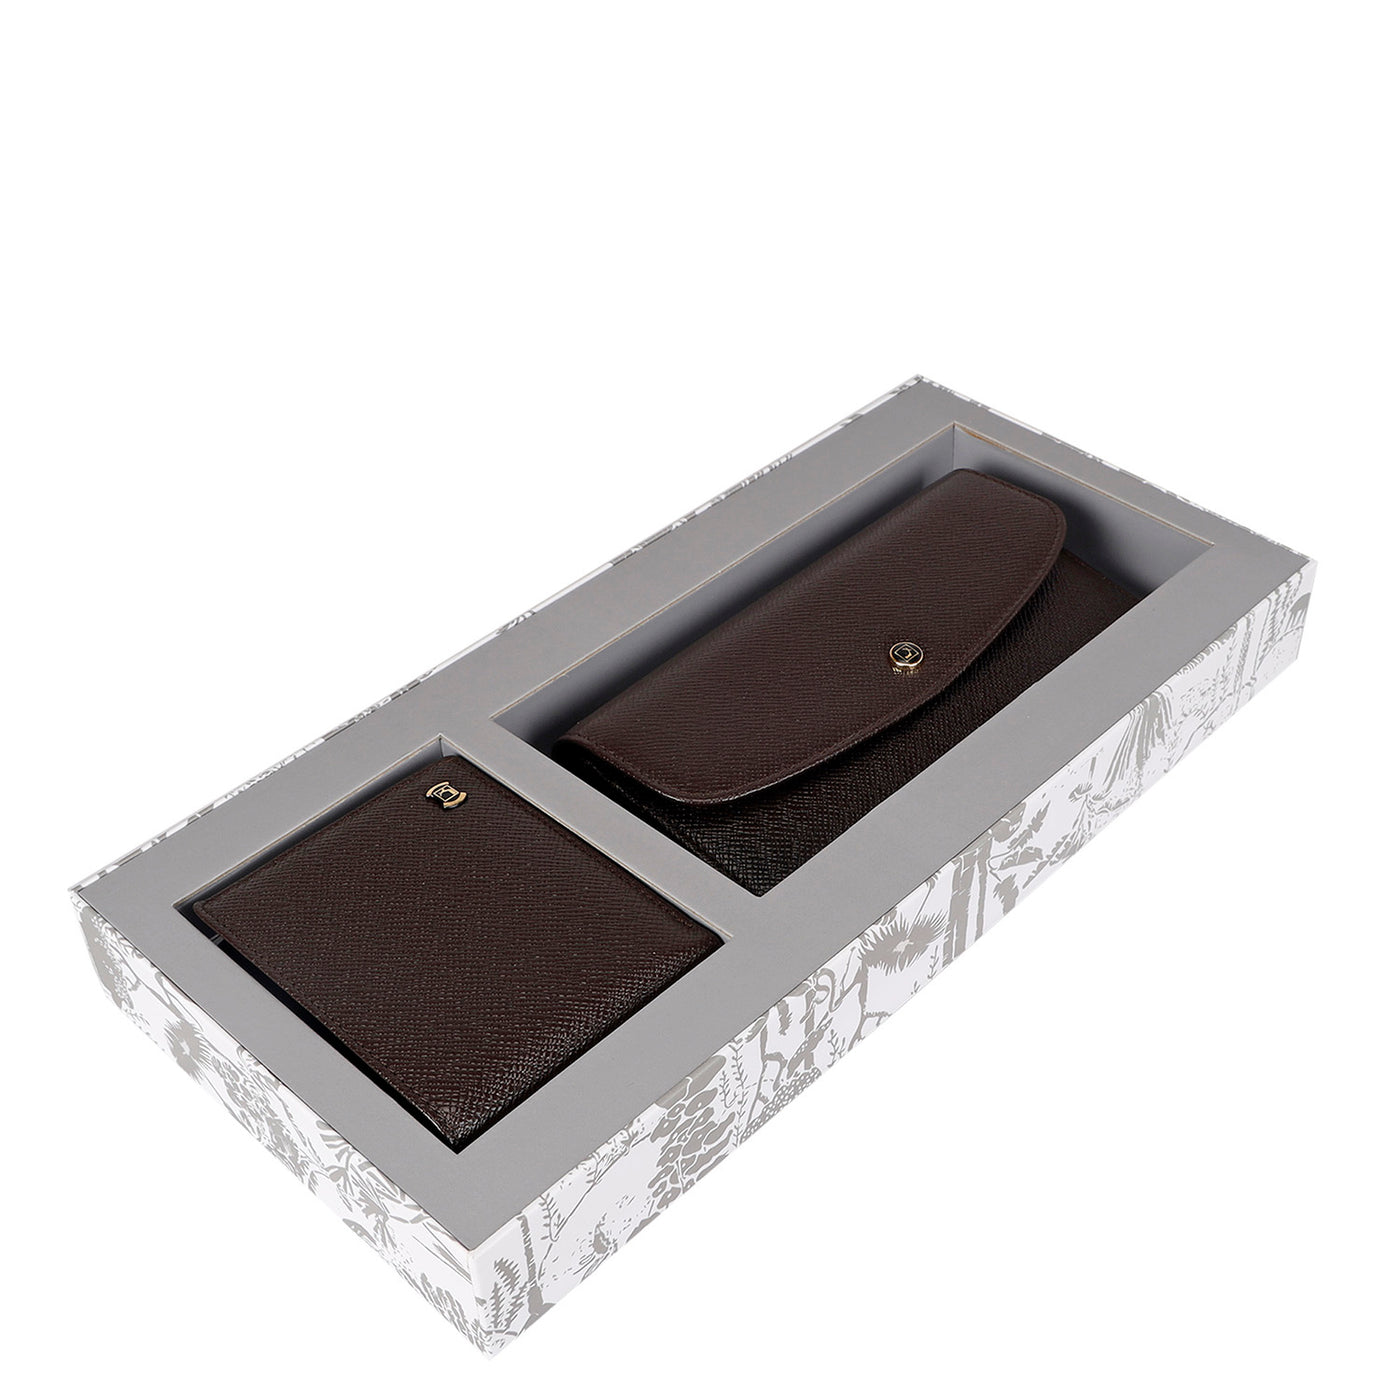 Chocolate Franzy Leather Mens & Ladies Wallet Gift Set